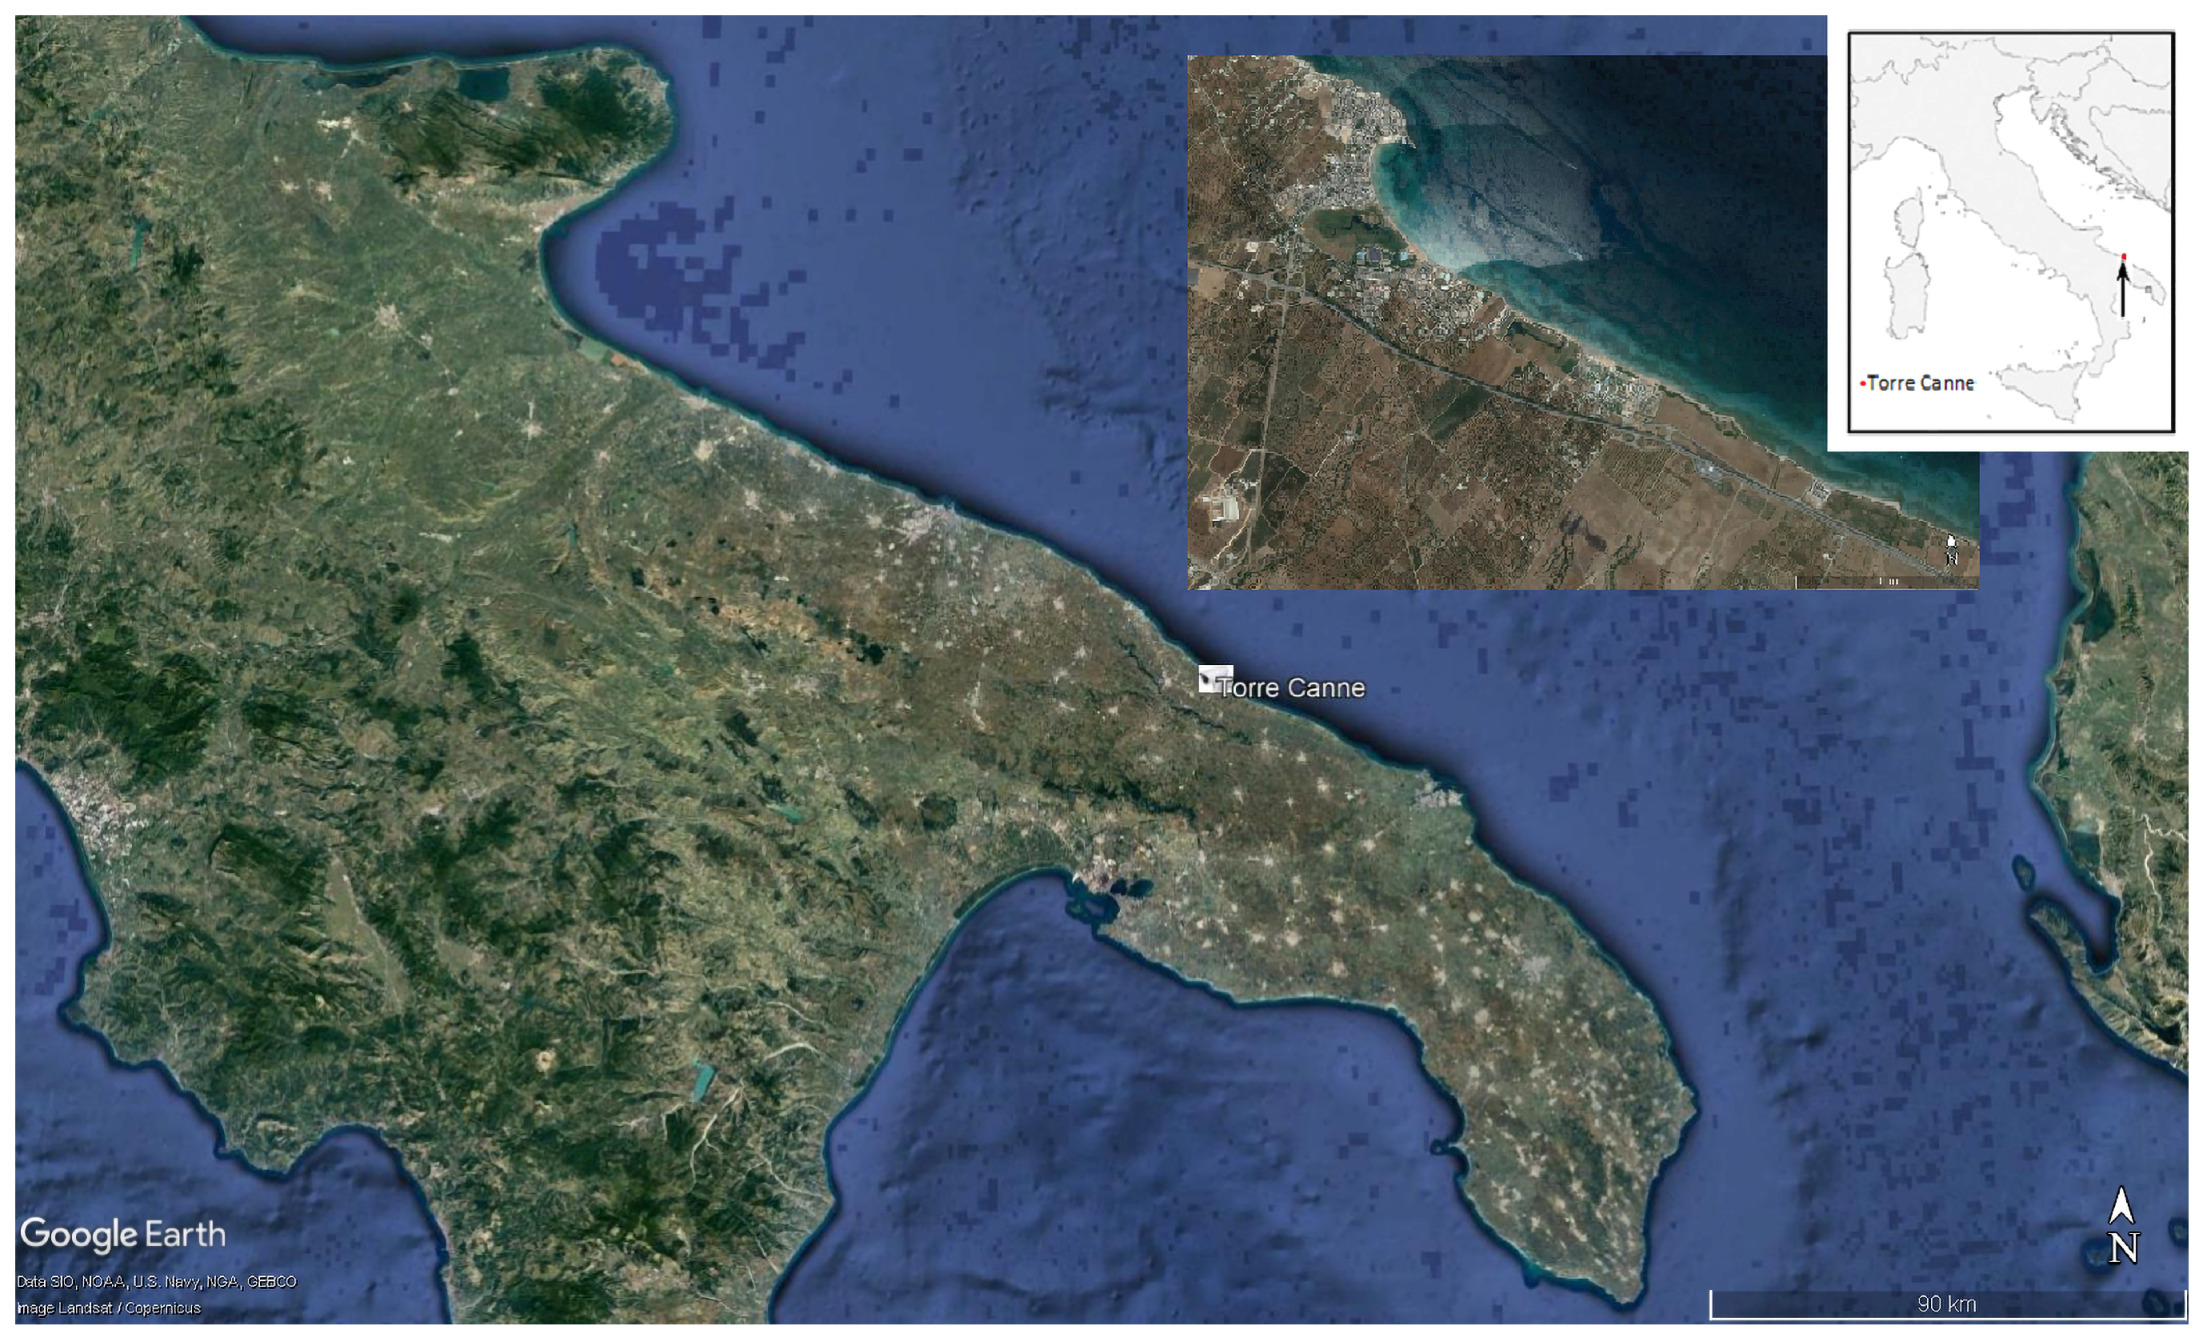 Torre Canne location along Apulia region in the southern of Italy